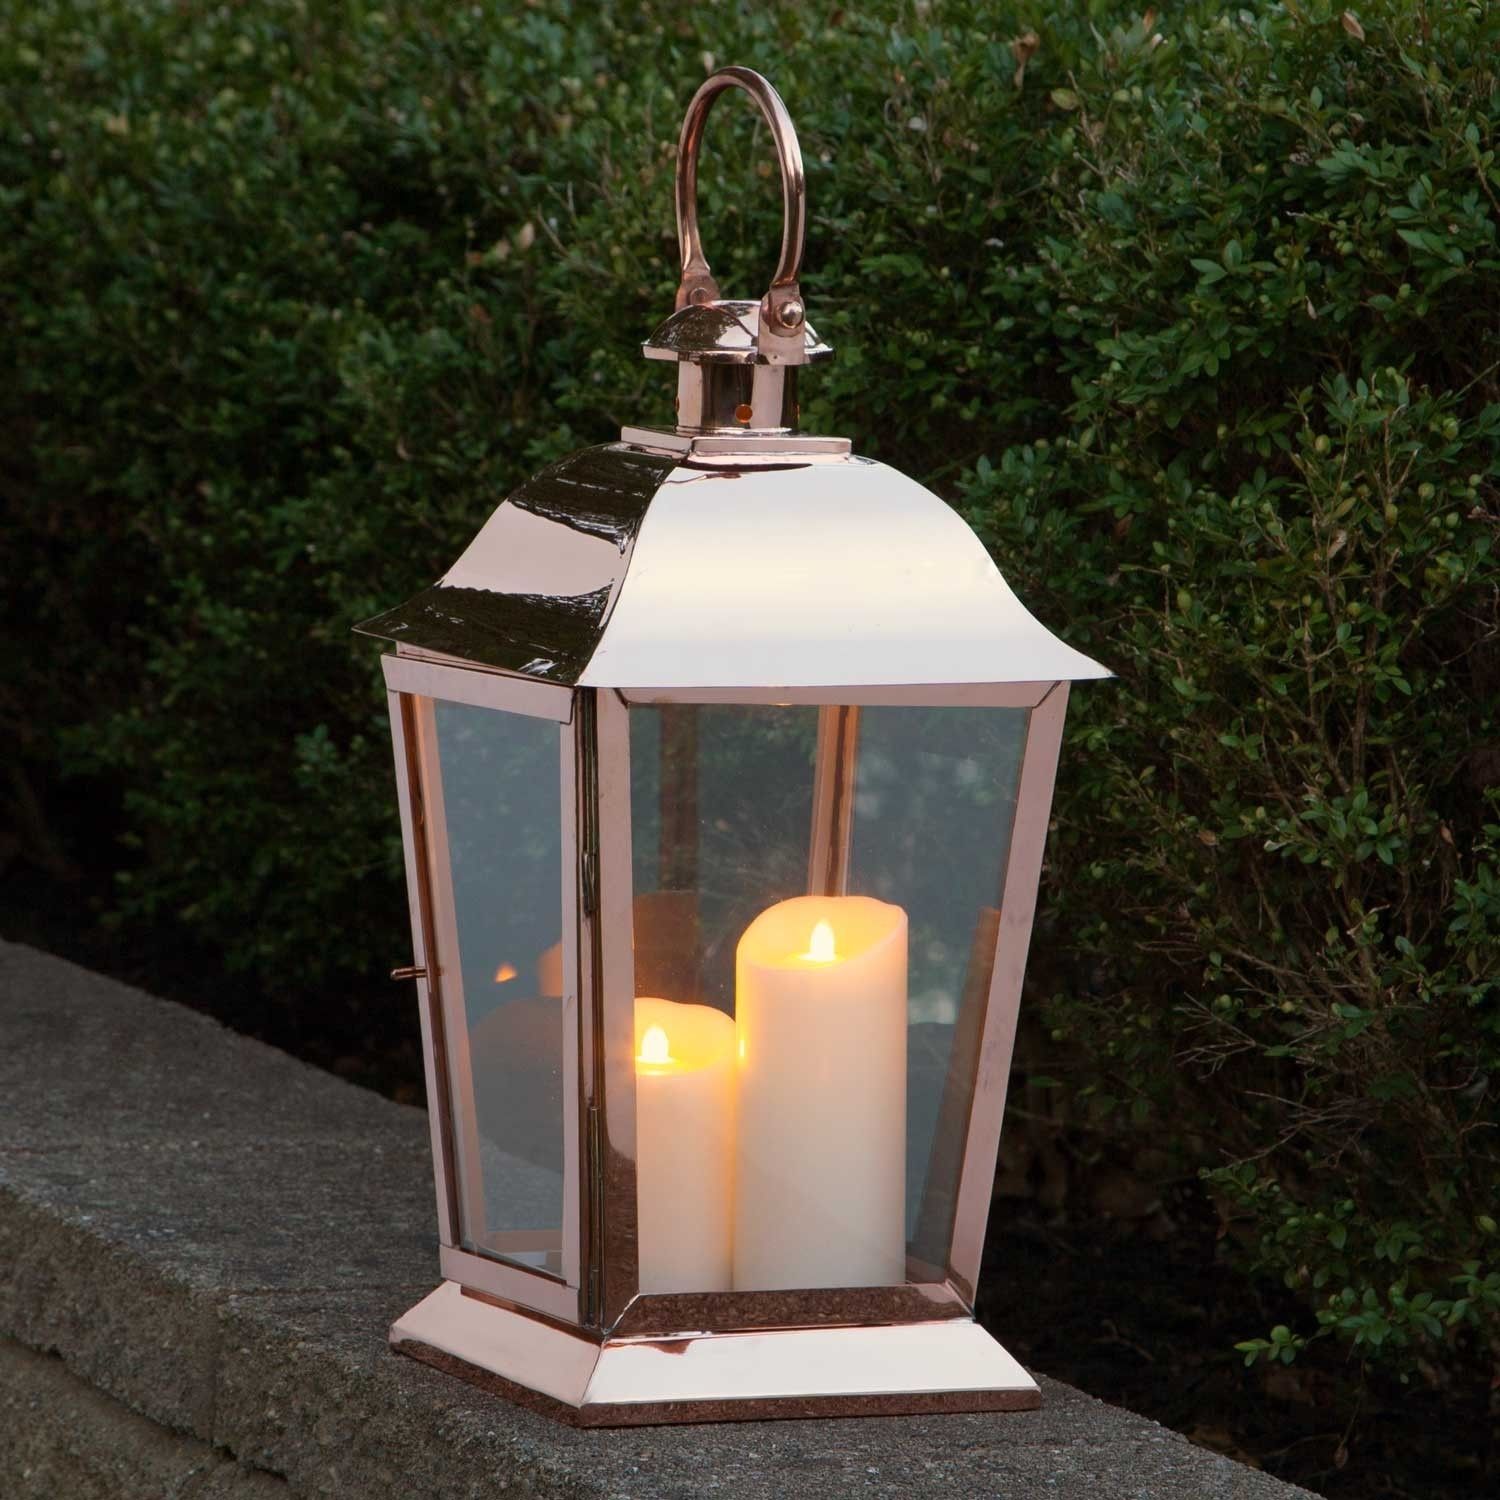 Kirklands Lanterns Hanging Candle Lantern Home Decor With Candles Intended For Inexpensive Outdoor Lanterns (View 10 of 20)